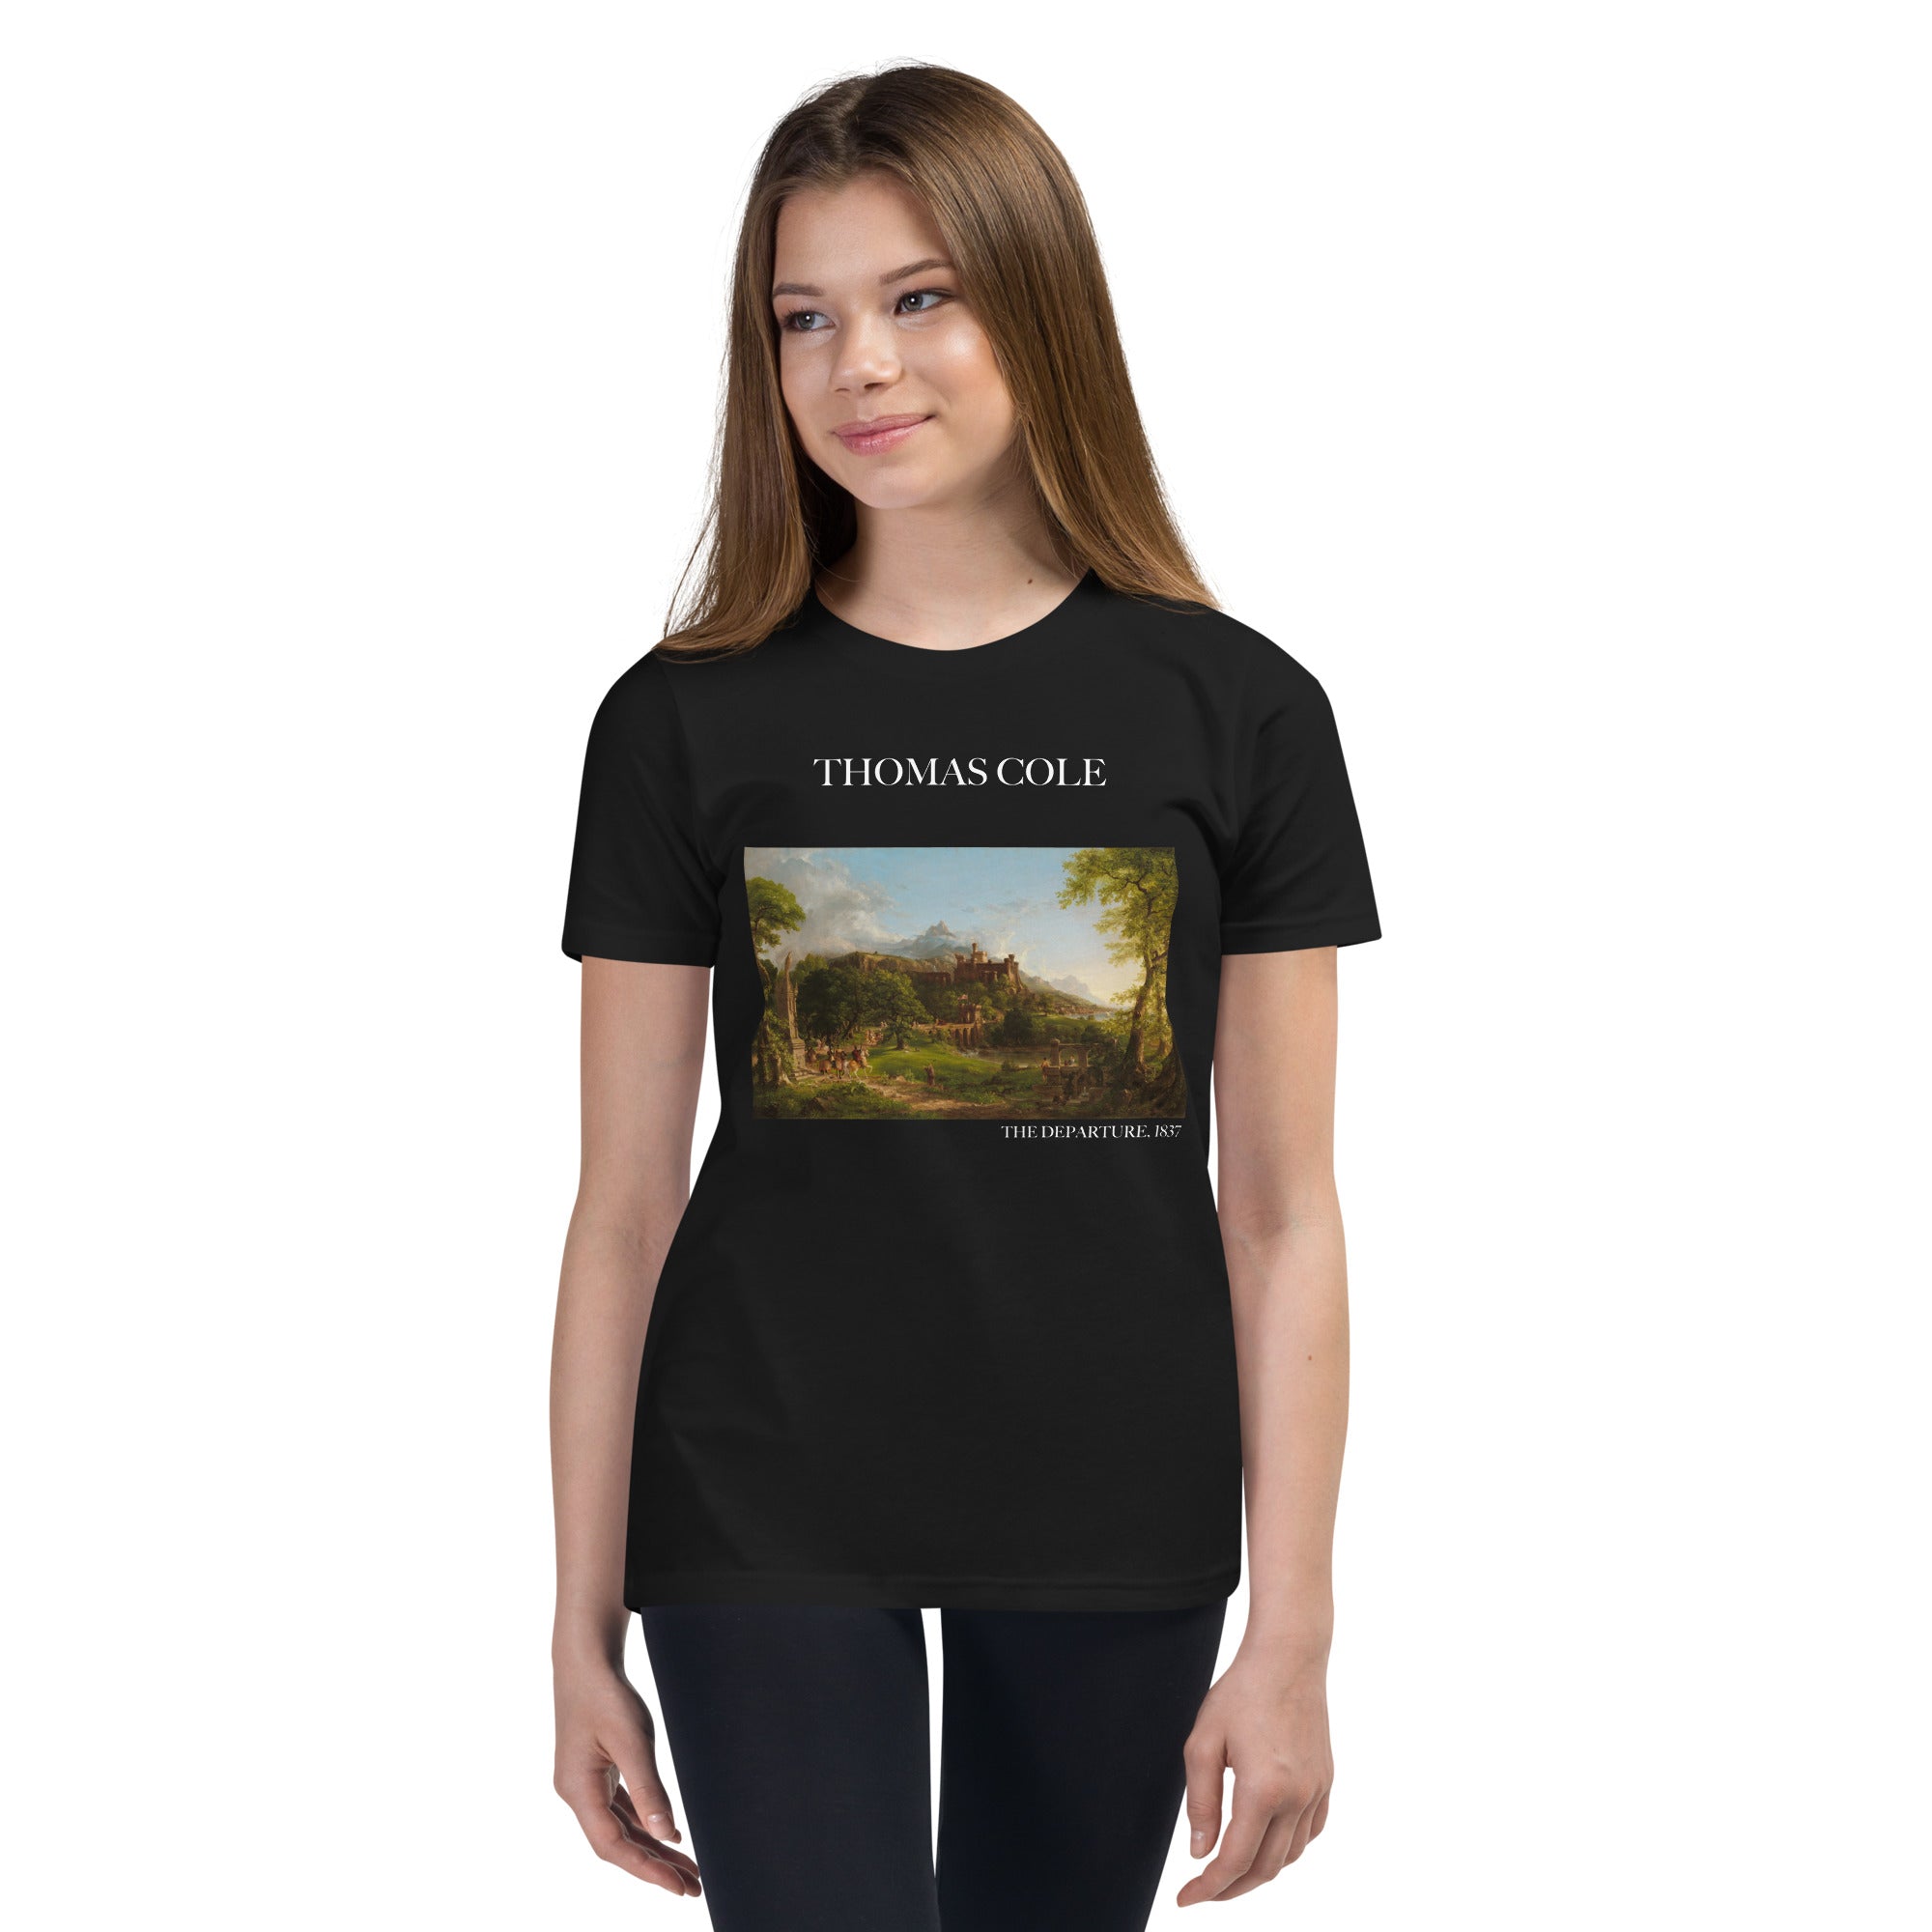 Thomas Cole 'The Departure' Famous Painting Short Sleeve T-Shirt | Premium Youth Art Tee